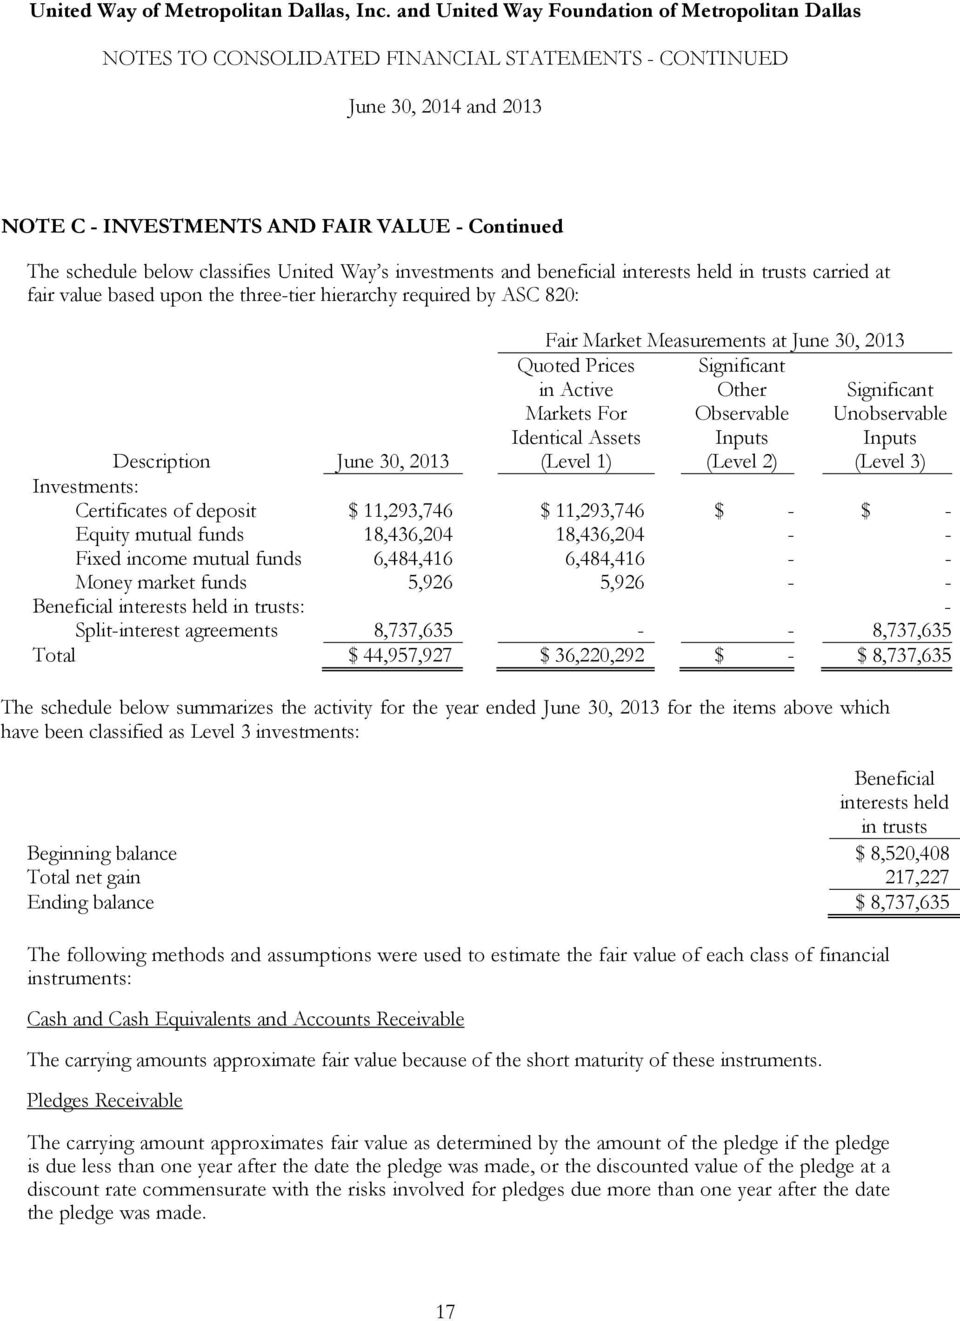 Unobservable Inputs (Level 3) Description June 30, 2013 Investments: Certificates of deposit $ 11,293,746 $ 11,293,746 $ - $ - Equity mutual funds 18,436,204 18,436,204 - - Fixed income mutual funds